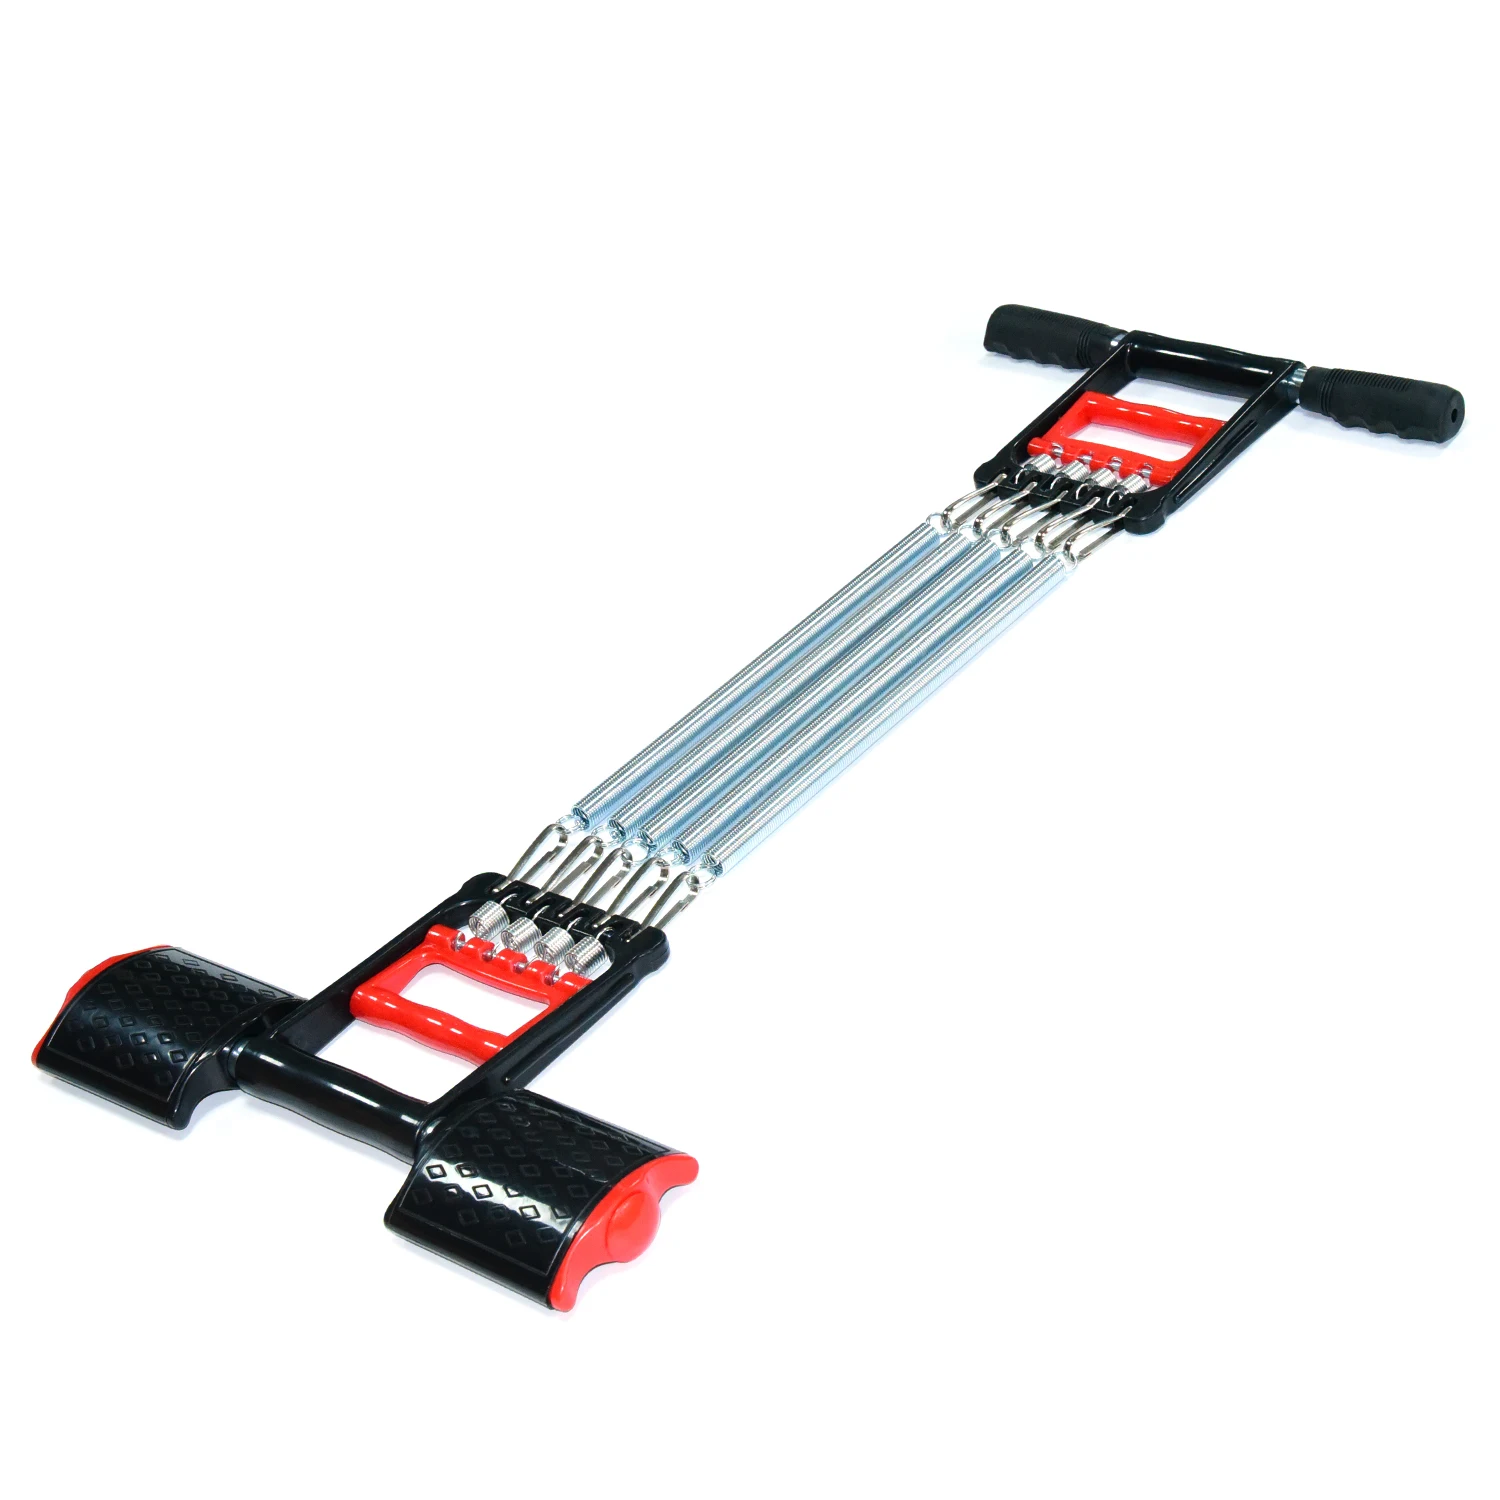 

3 in 1 Adjustable Spring Chest Developer Expander Tension Puller Muscle Exercise Tackle Dual-purpose or Three-purpose Tensioner